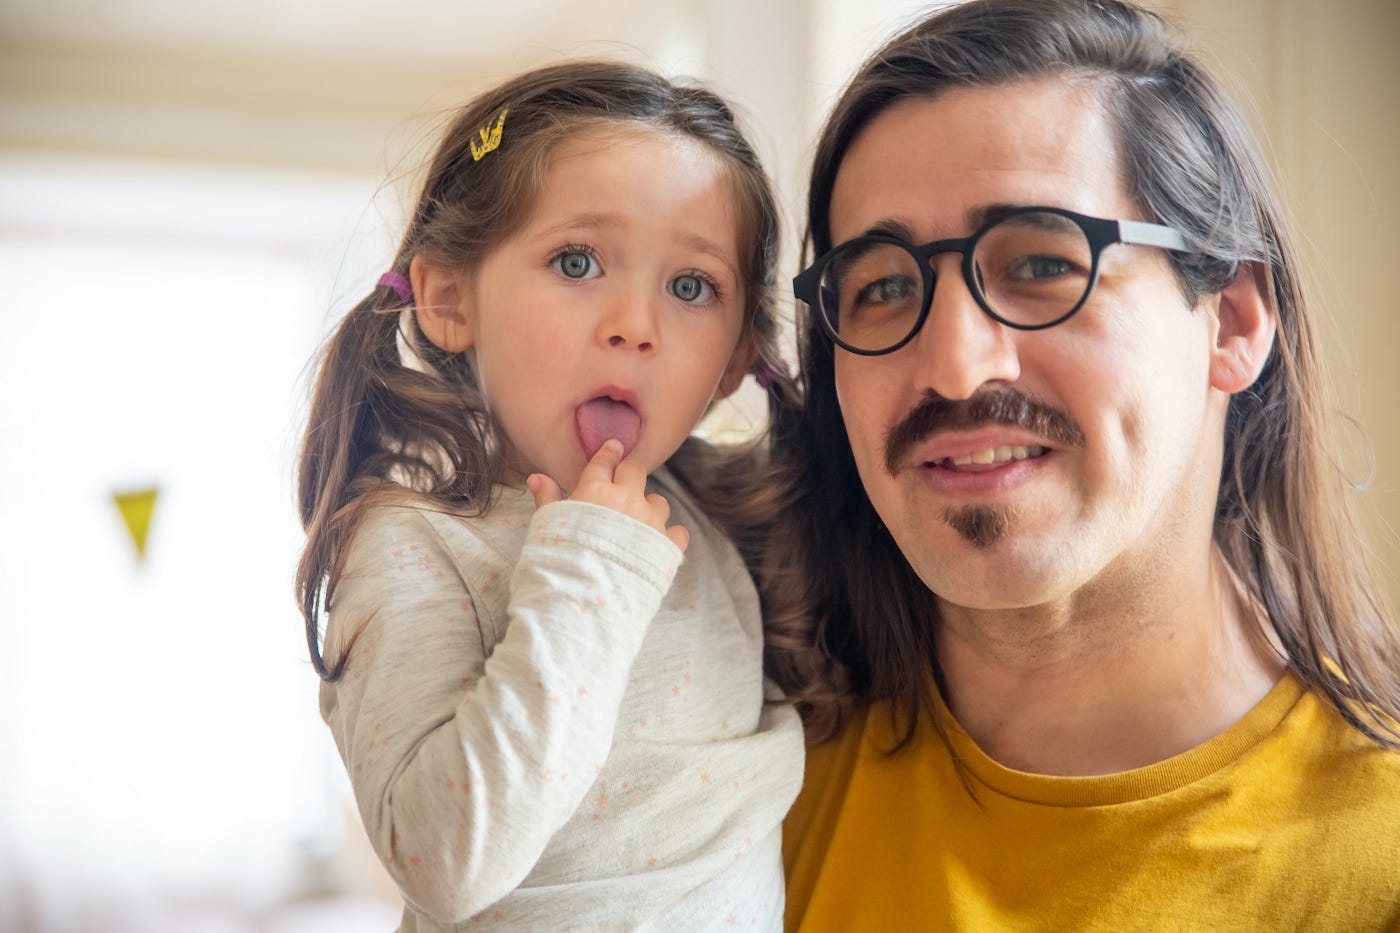 A man with a young child, maybe his daughter. He looks like he’s listening. She has a finger on her tounge. The image represents learning something new about cybercrime and implies cybercrime is relevant to everyday people.